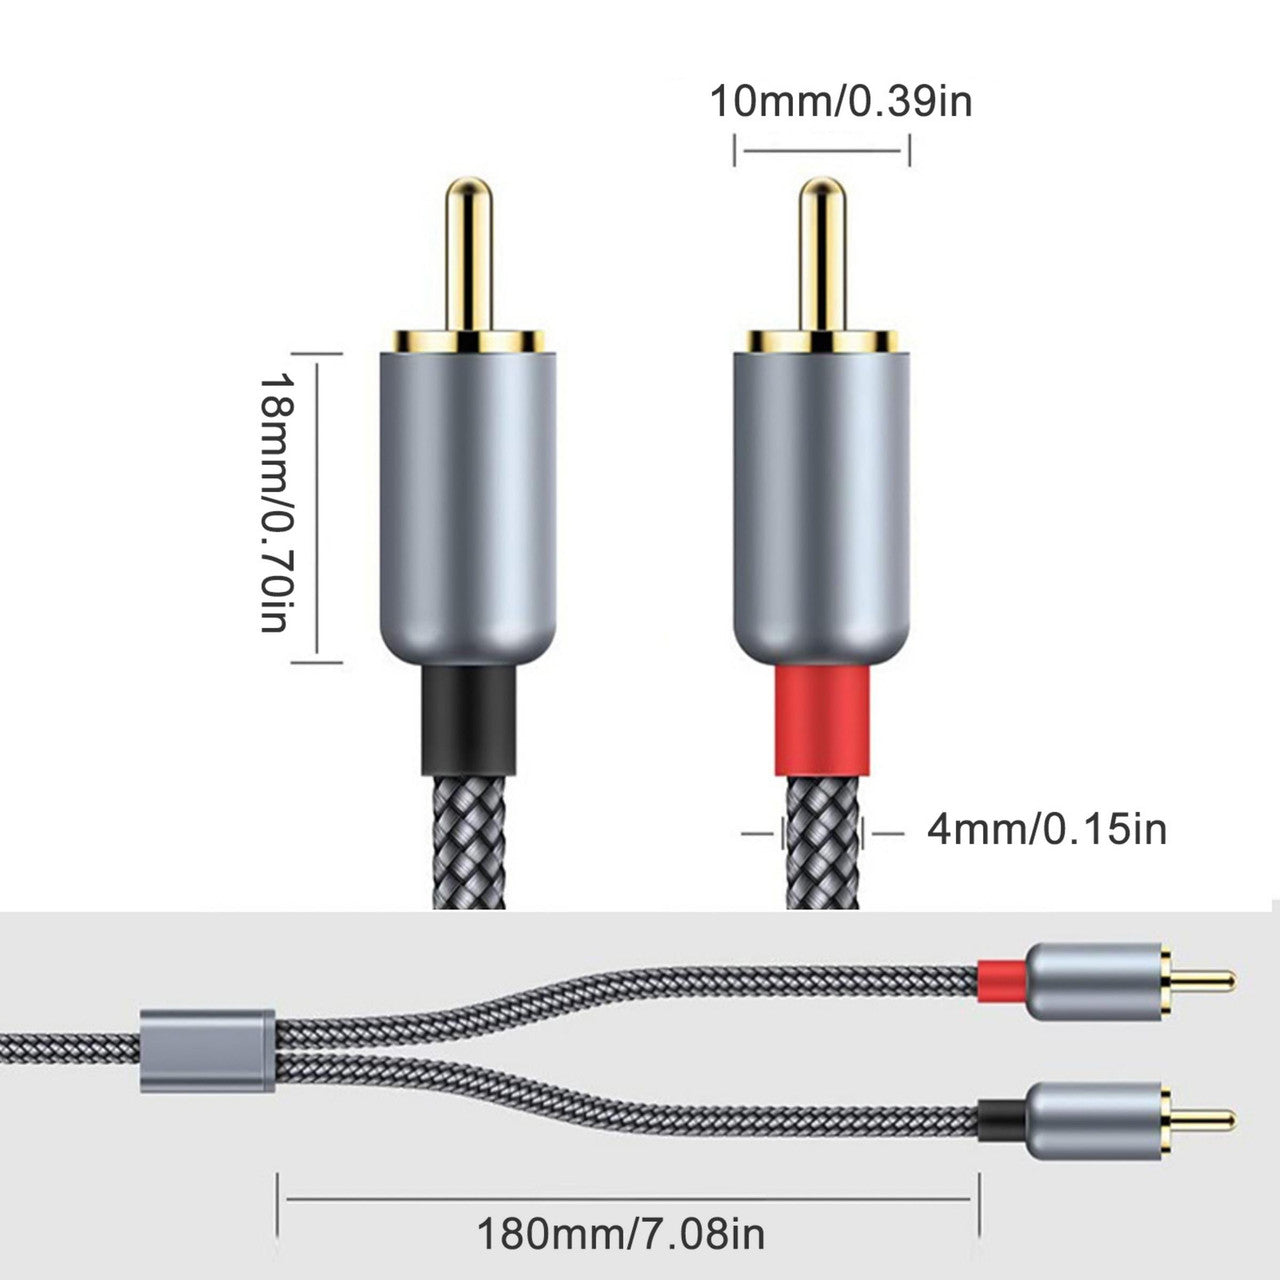 2 Packs Rca M/M Stereo Audio Cable - 6FT Rca Male Audio Stereo Subwoofer Cable, 6 Foot Nylon-Braided Auxiliary Audio Cord for Home Theater, Hdtv, Amplifiers, Hi-Fi Systems, Speakers, Left/Right